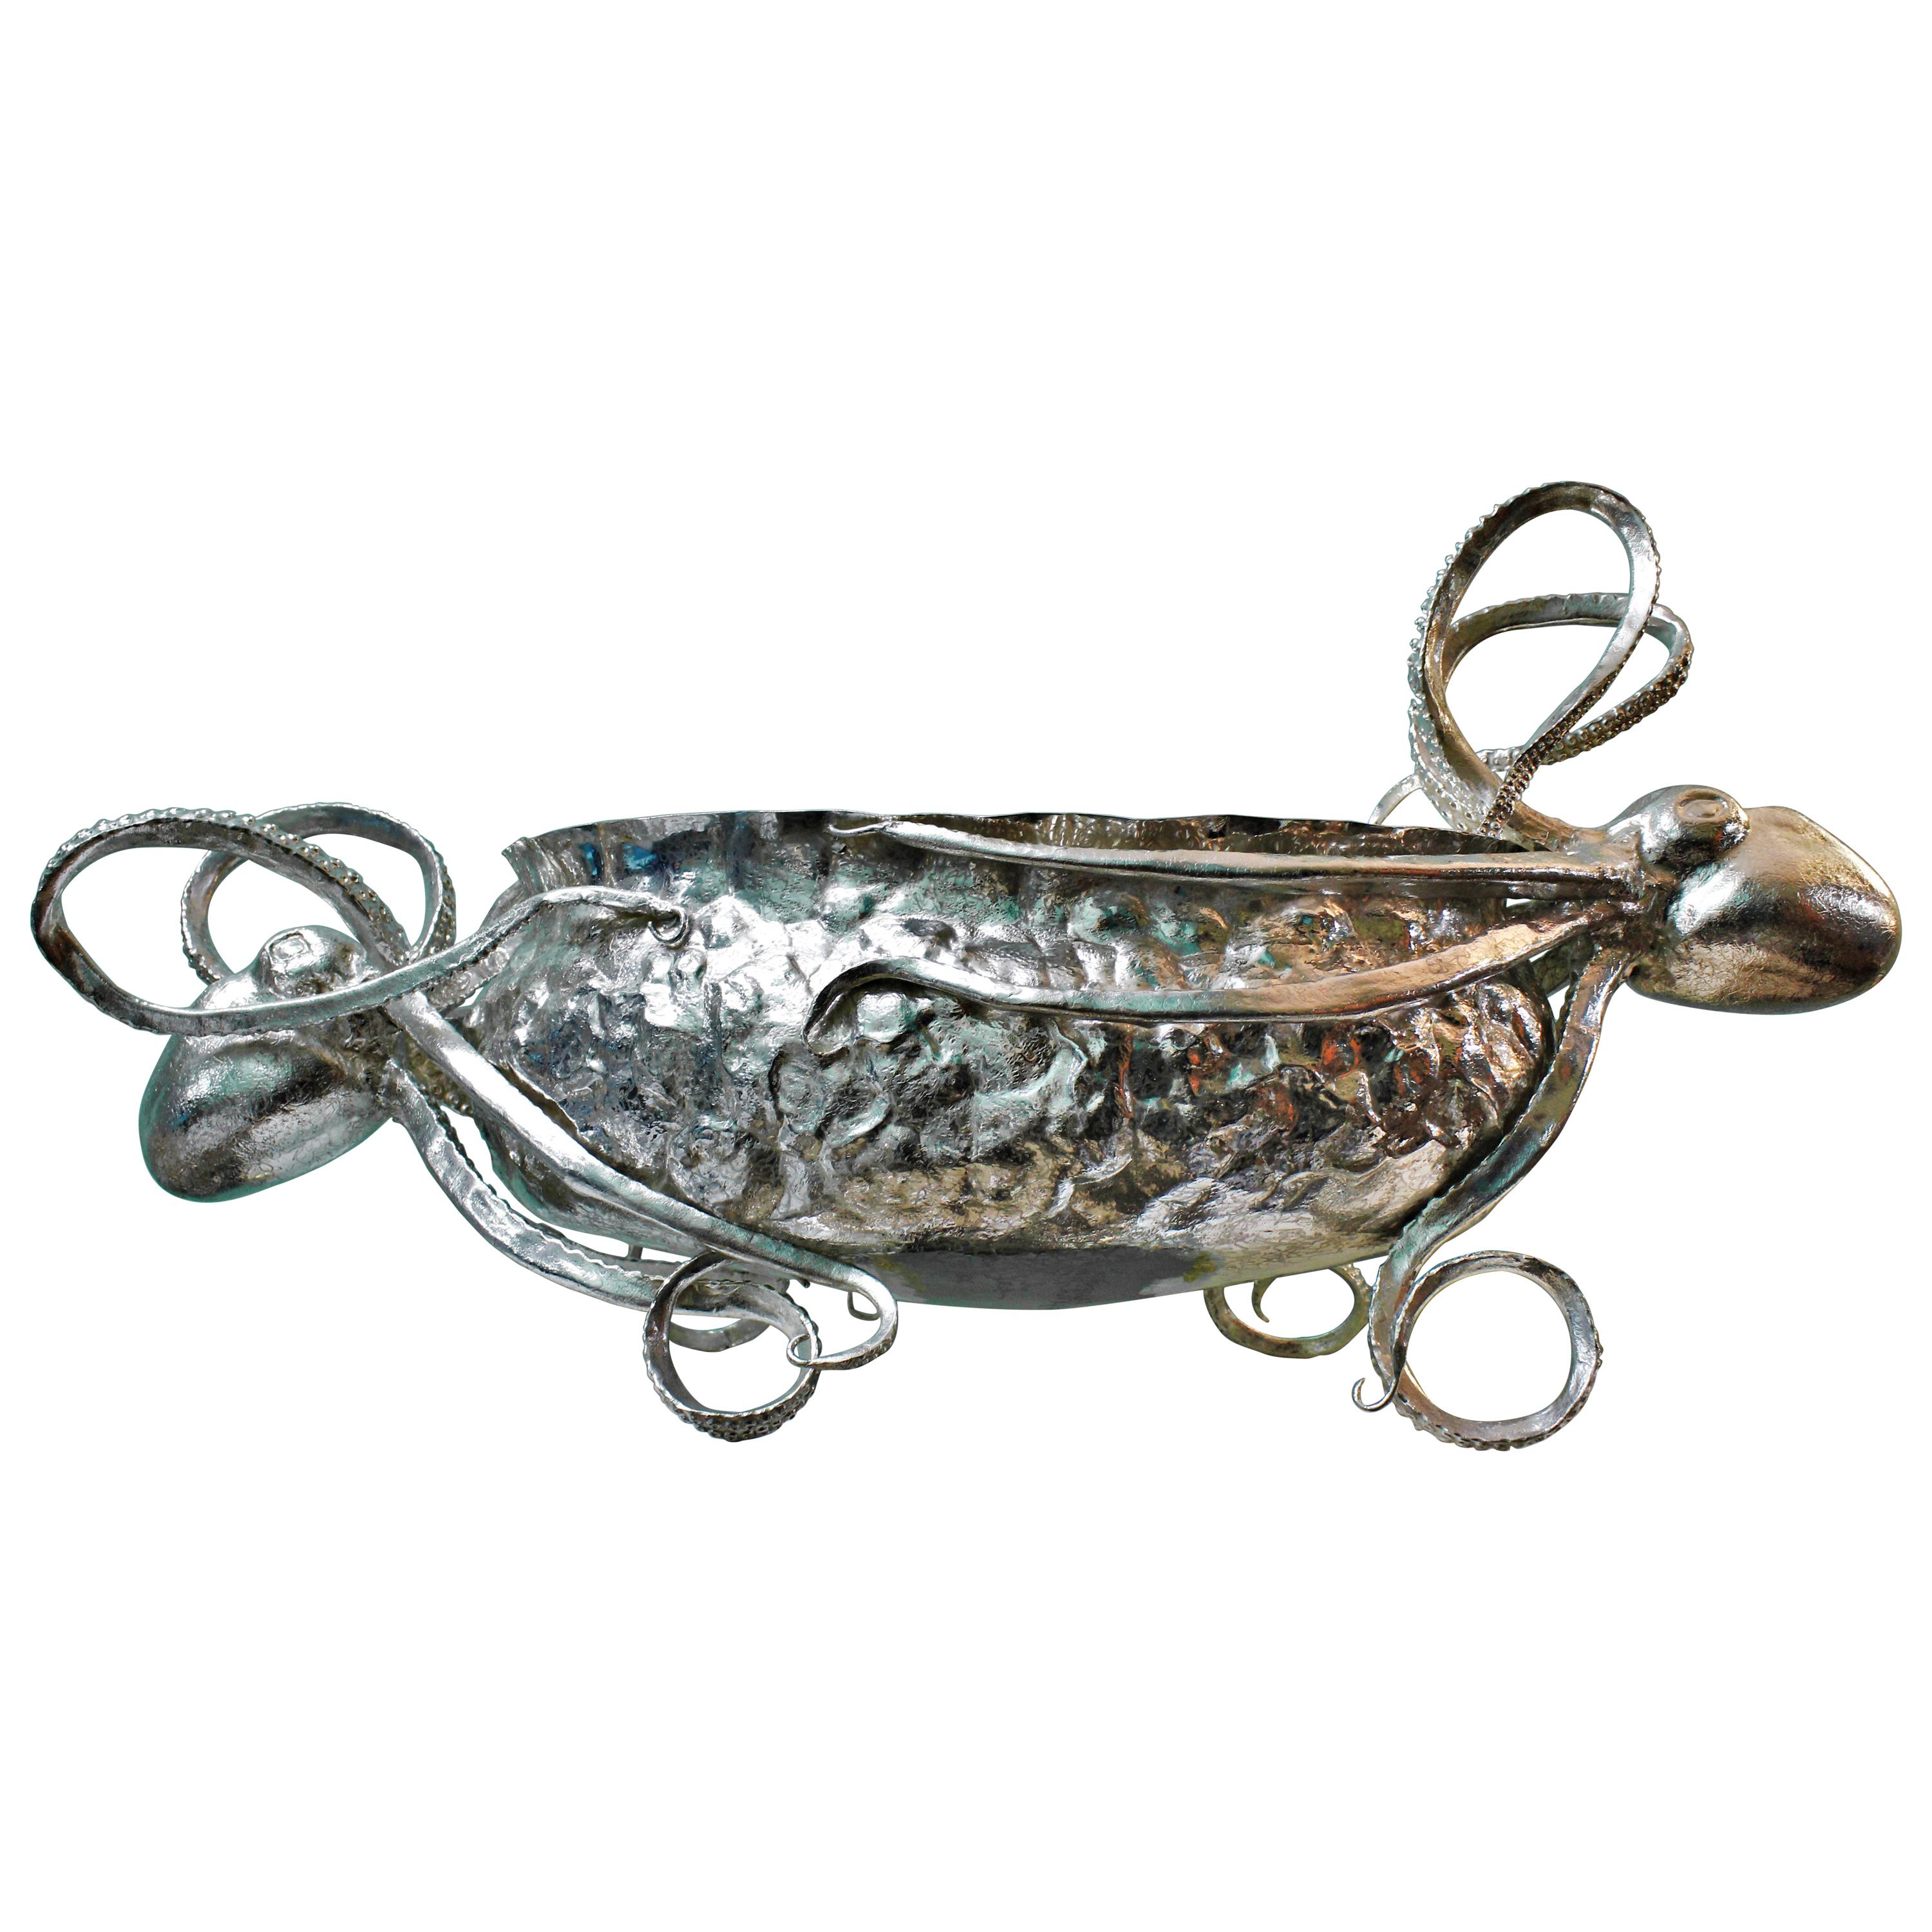 20th Century Embossed Engraved Silver Octopus Centerpiece Italy, 1930s